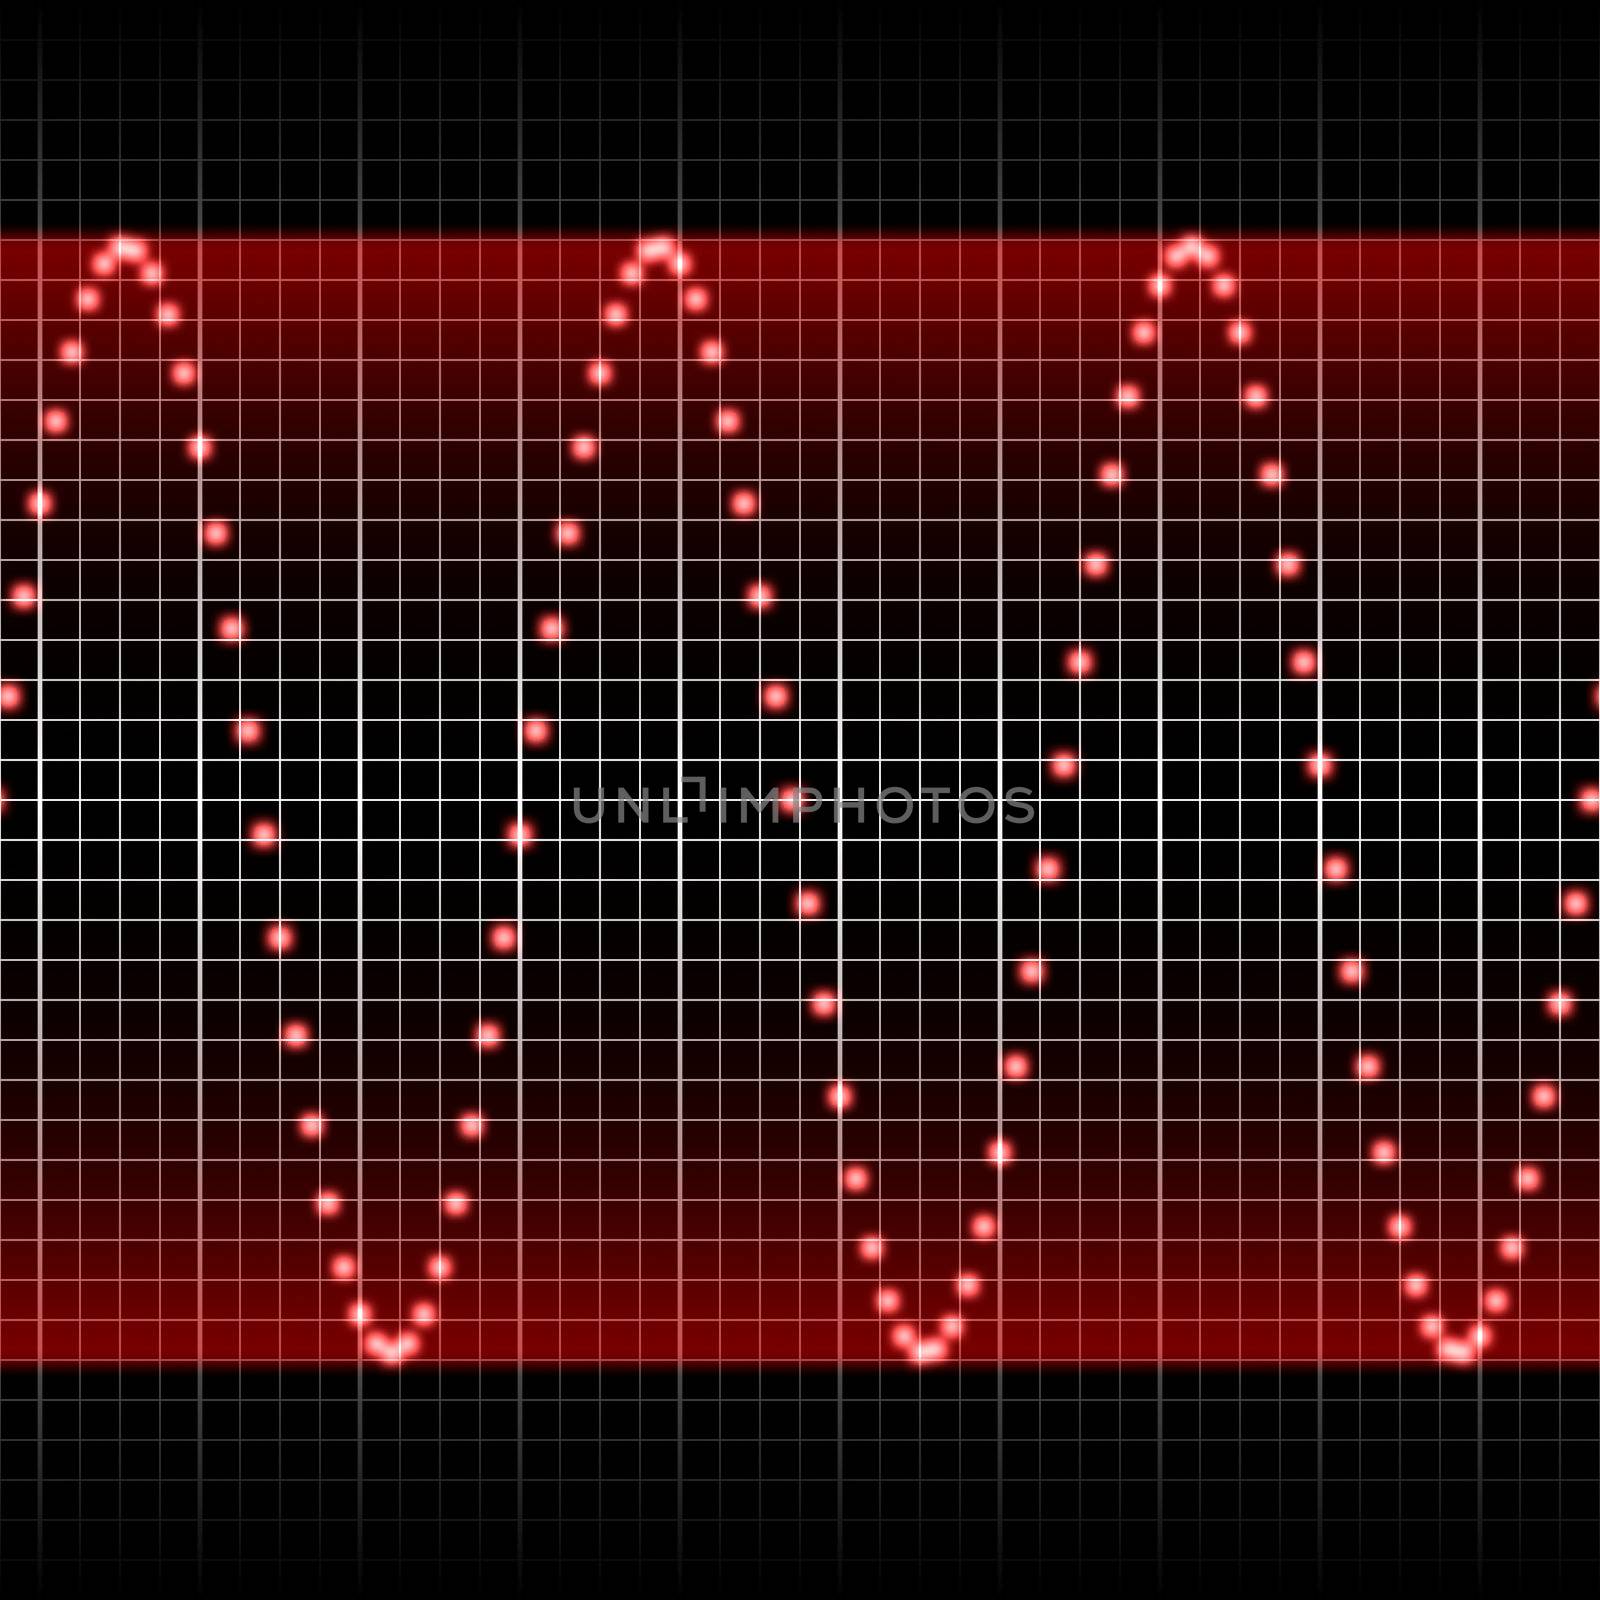 digitally created sound wave pattern, seamlessly tillable horizontally